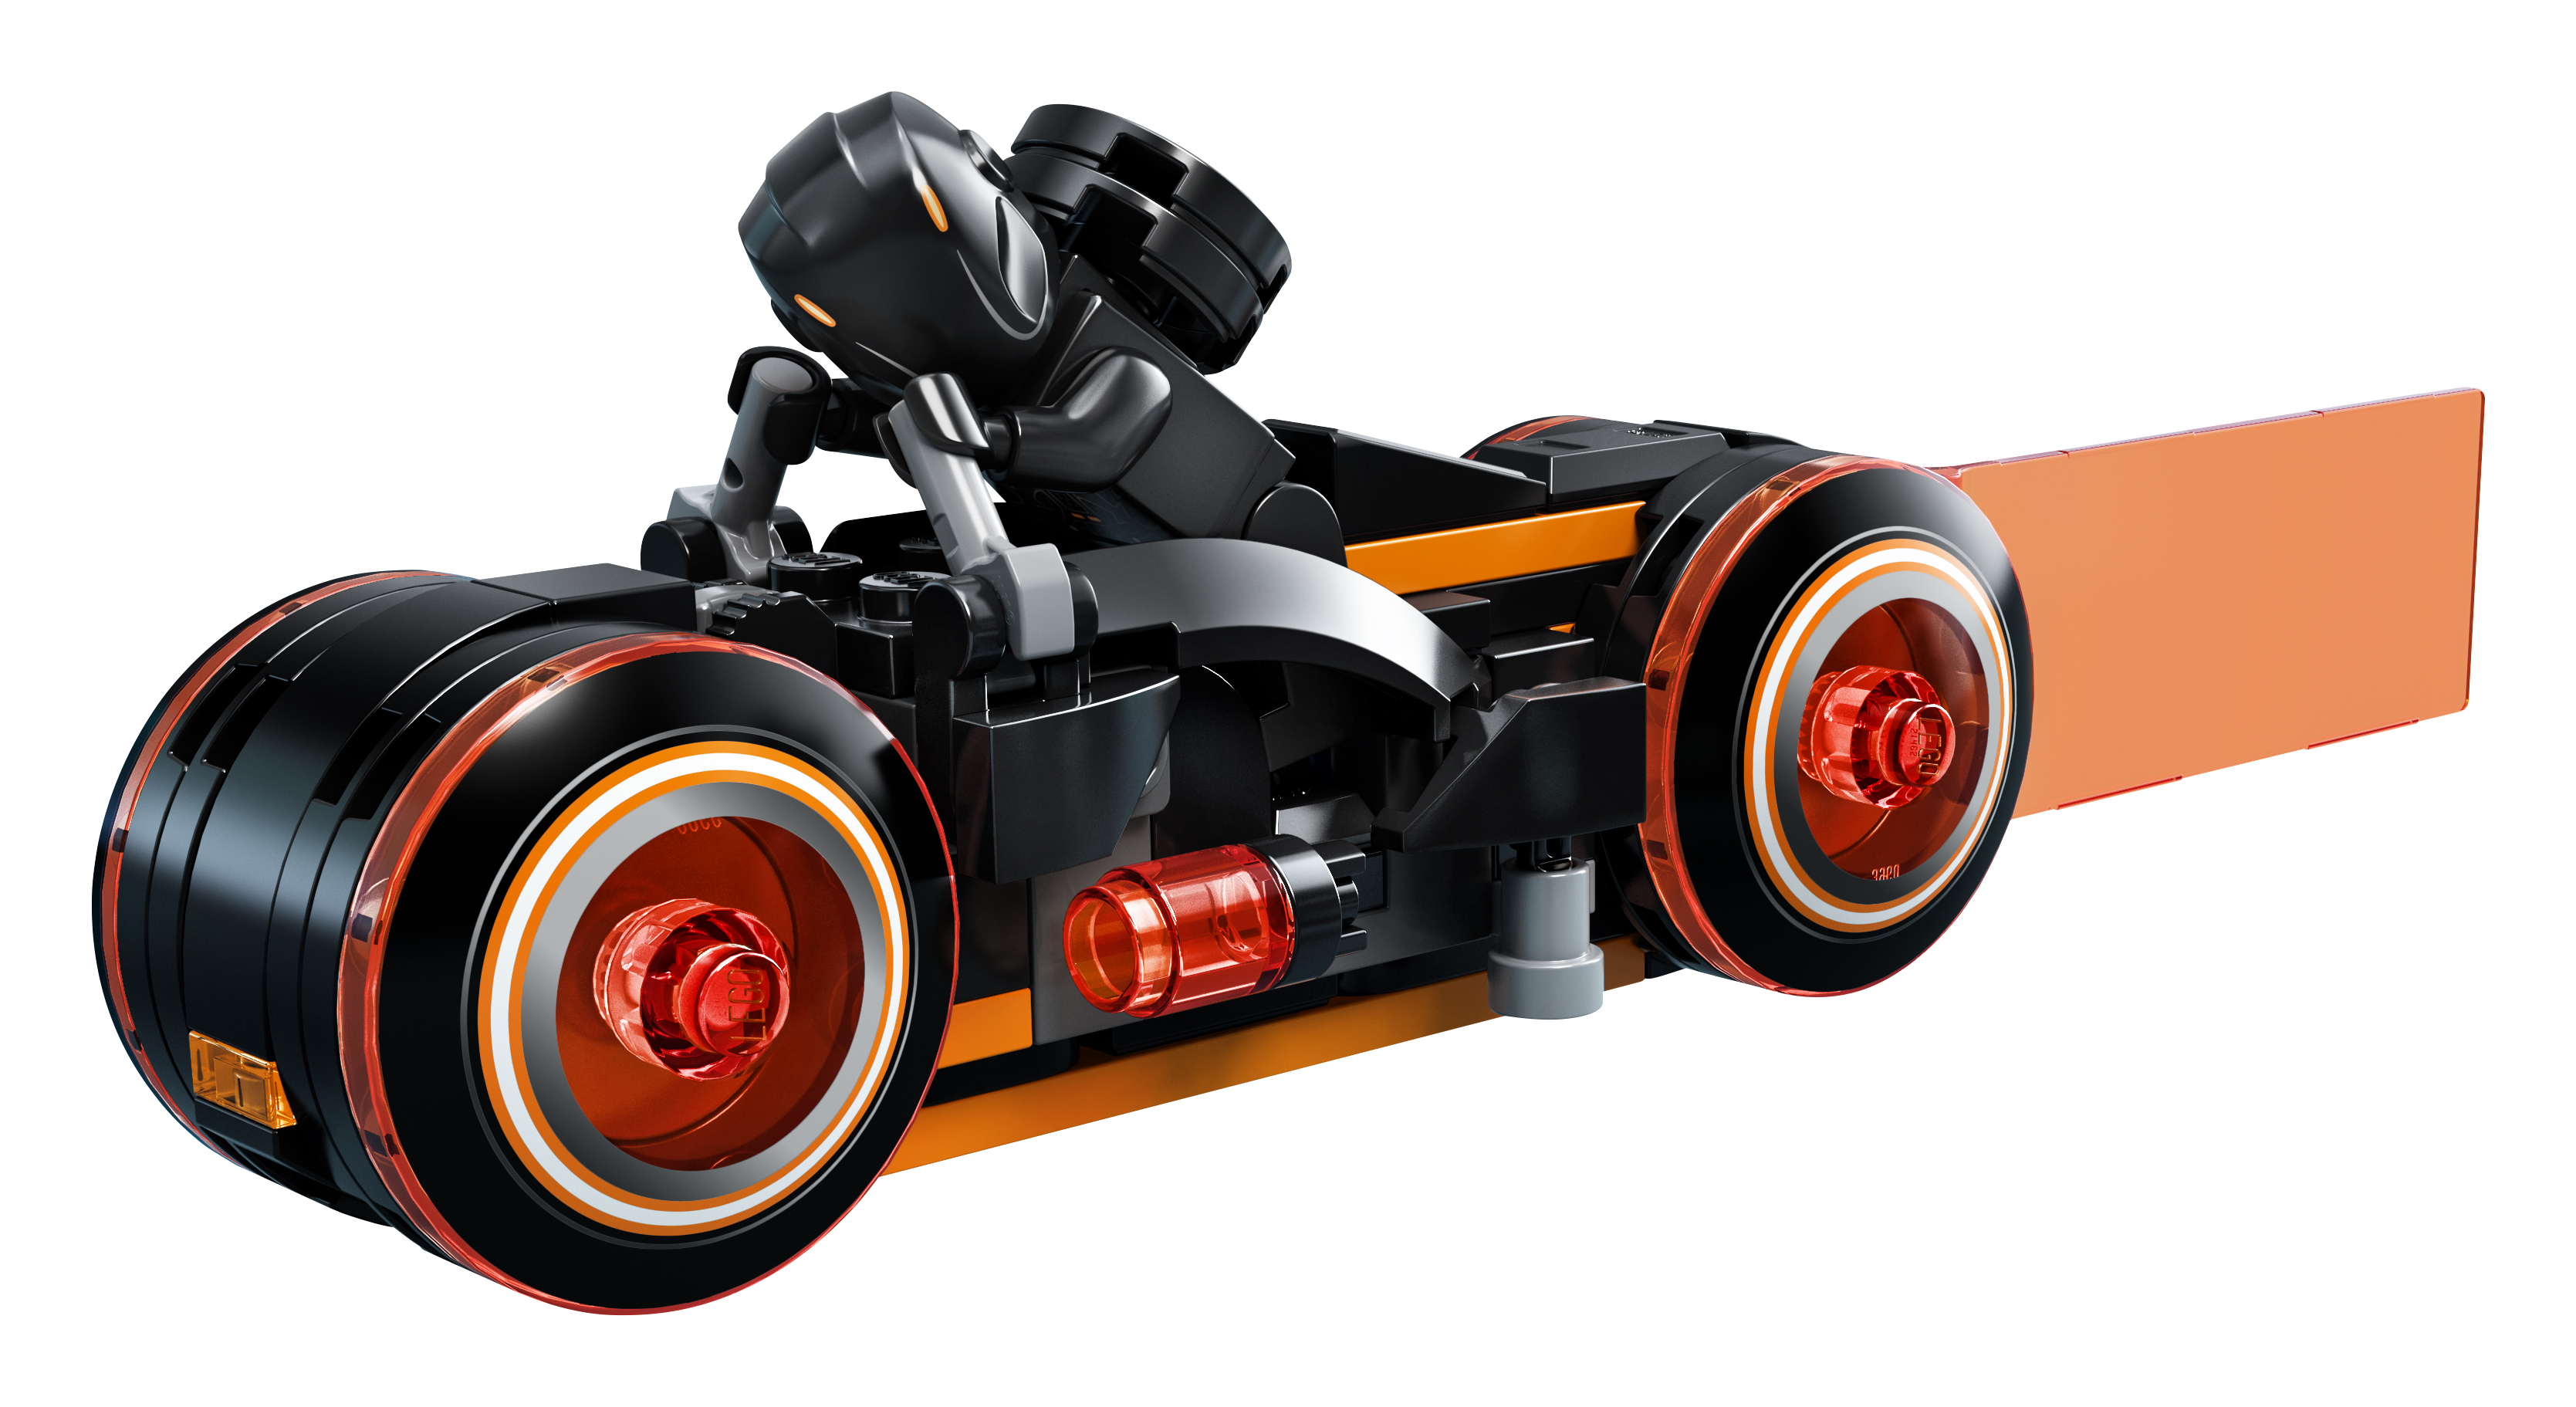 LEGO 21314 Tron: Legacy comes to LEGO Ideas on 31 March!